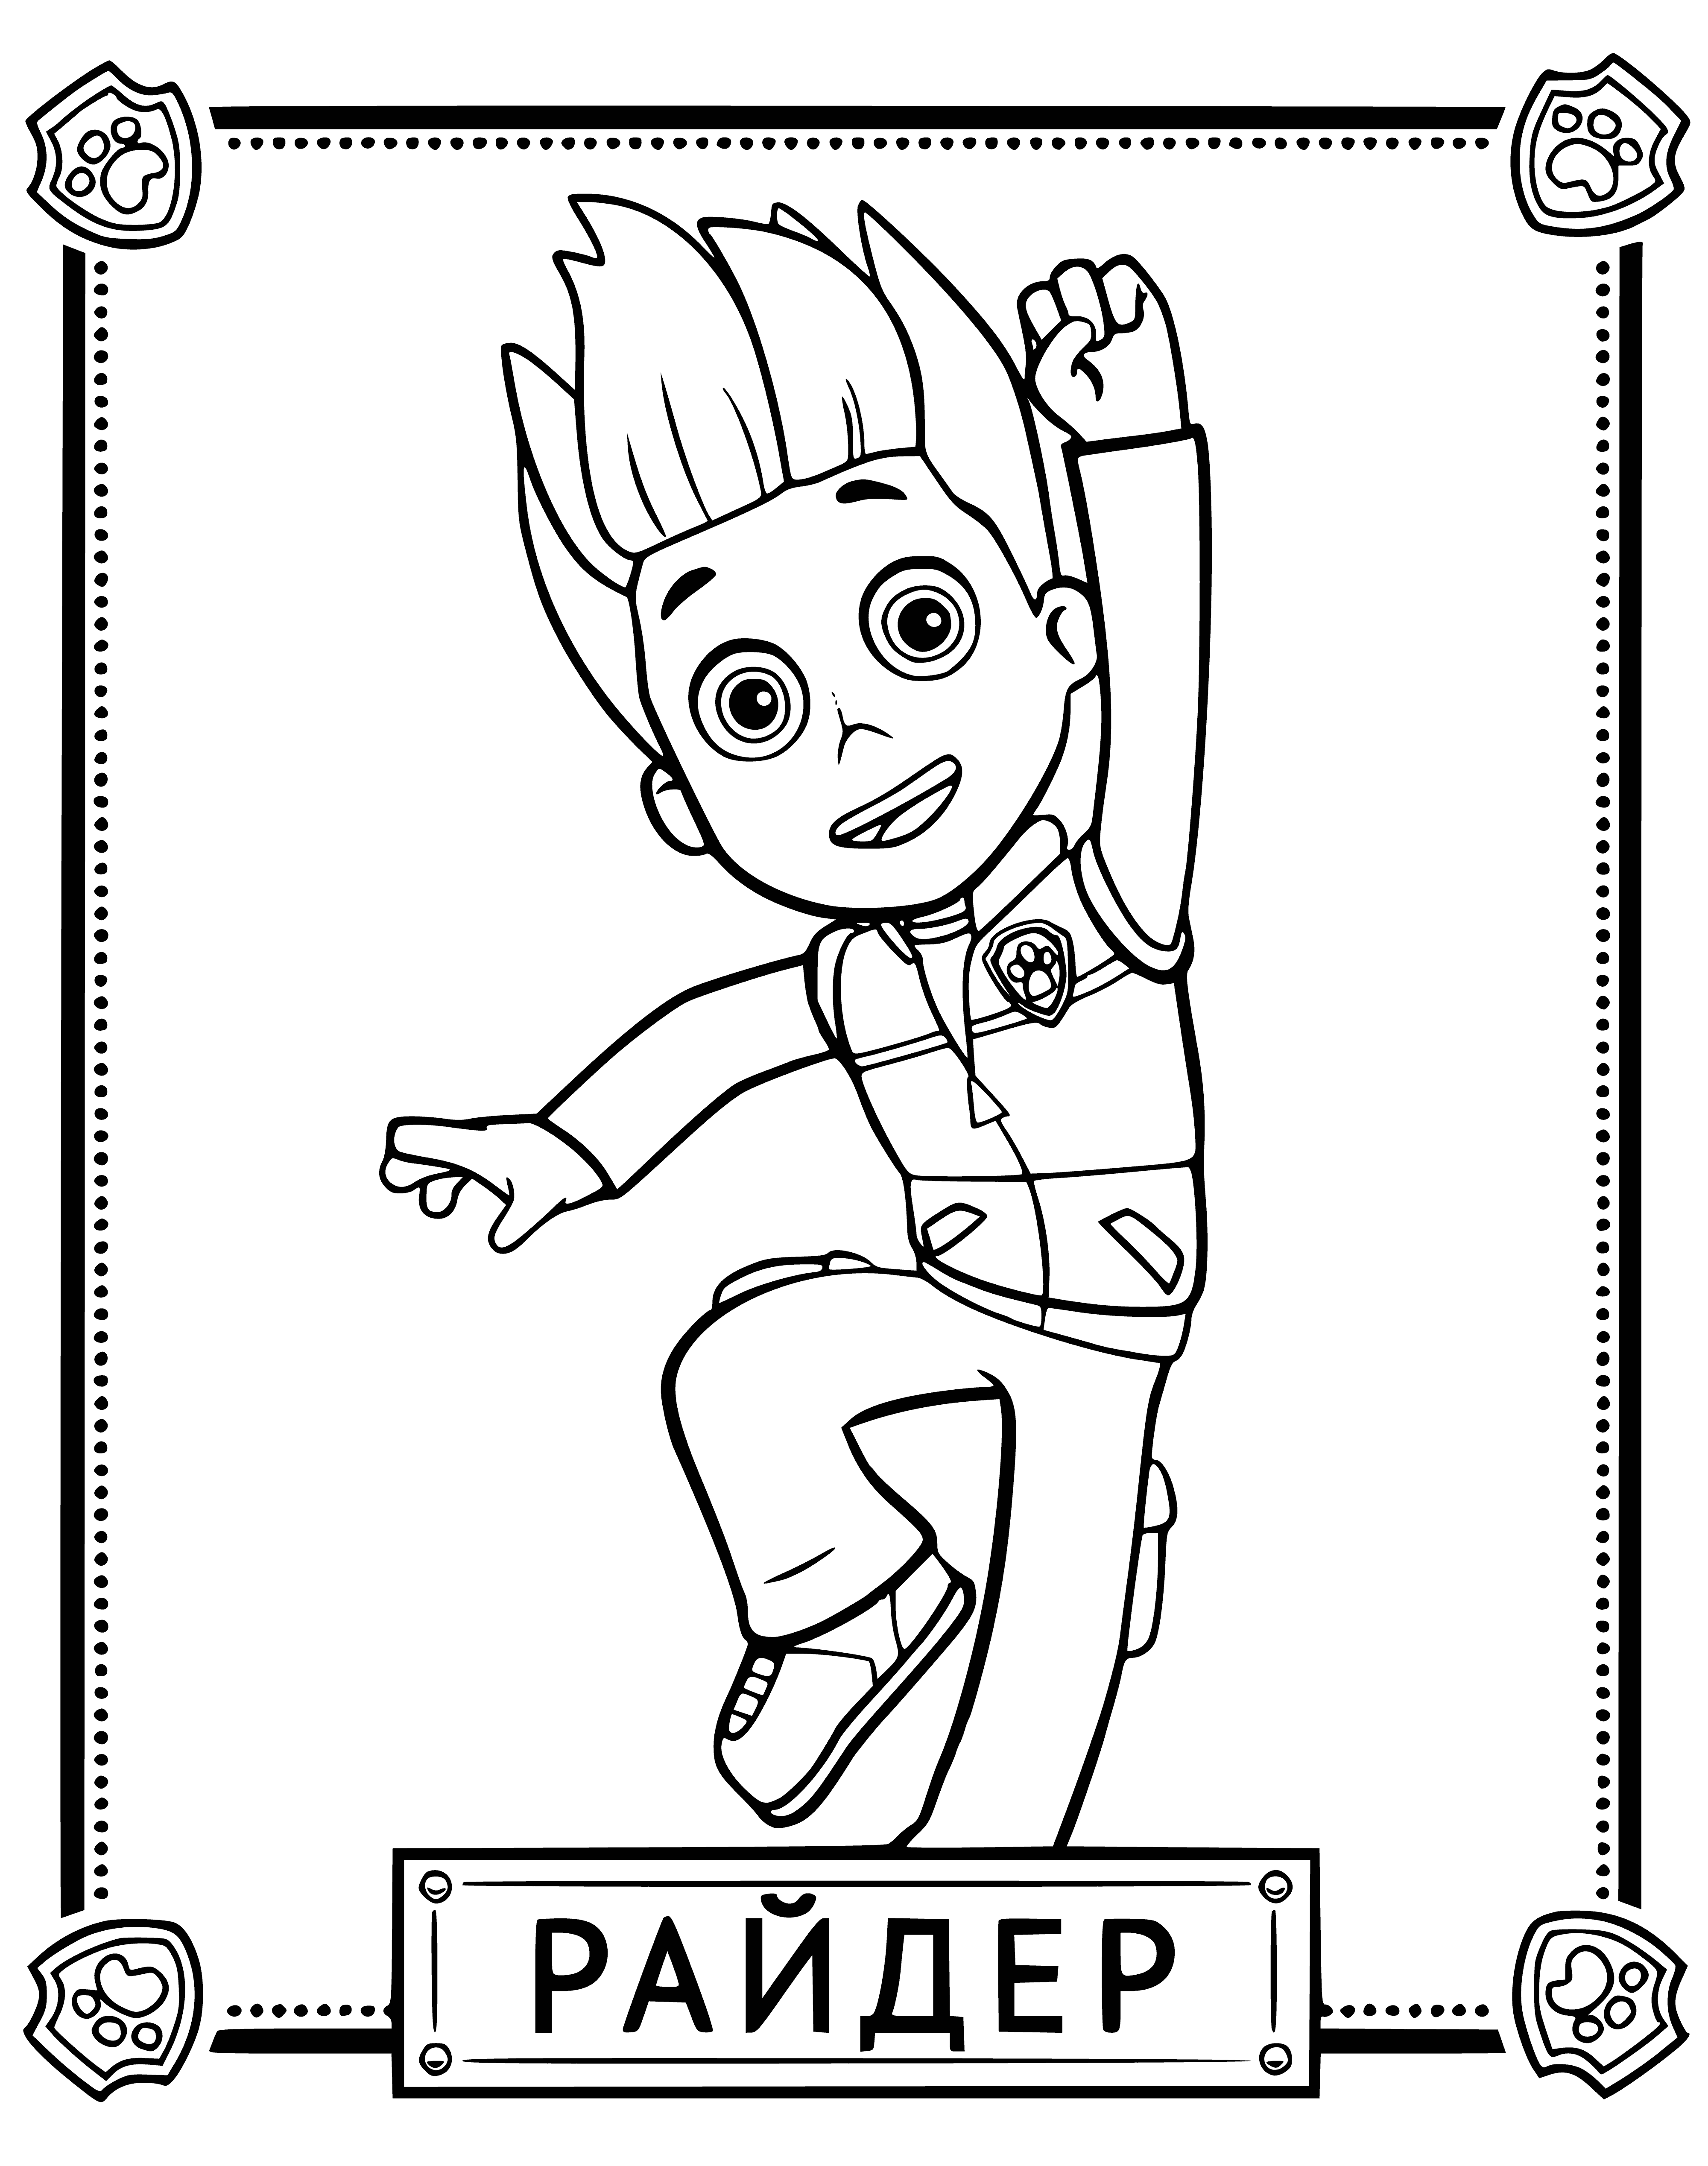 Rider coloring page